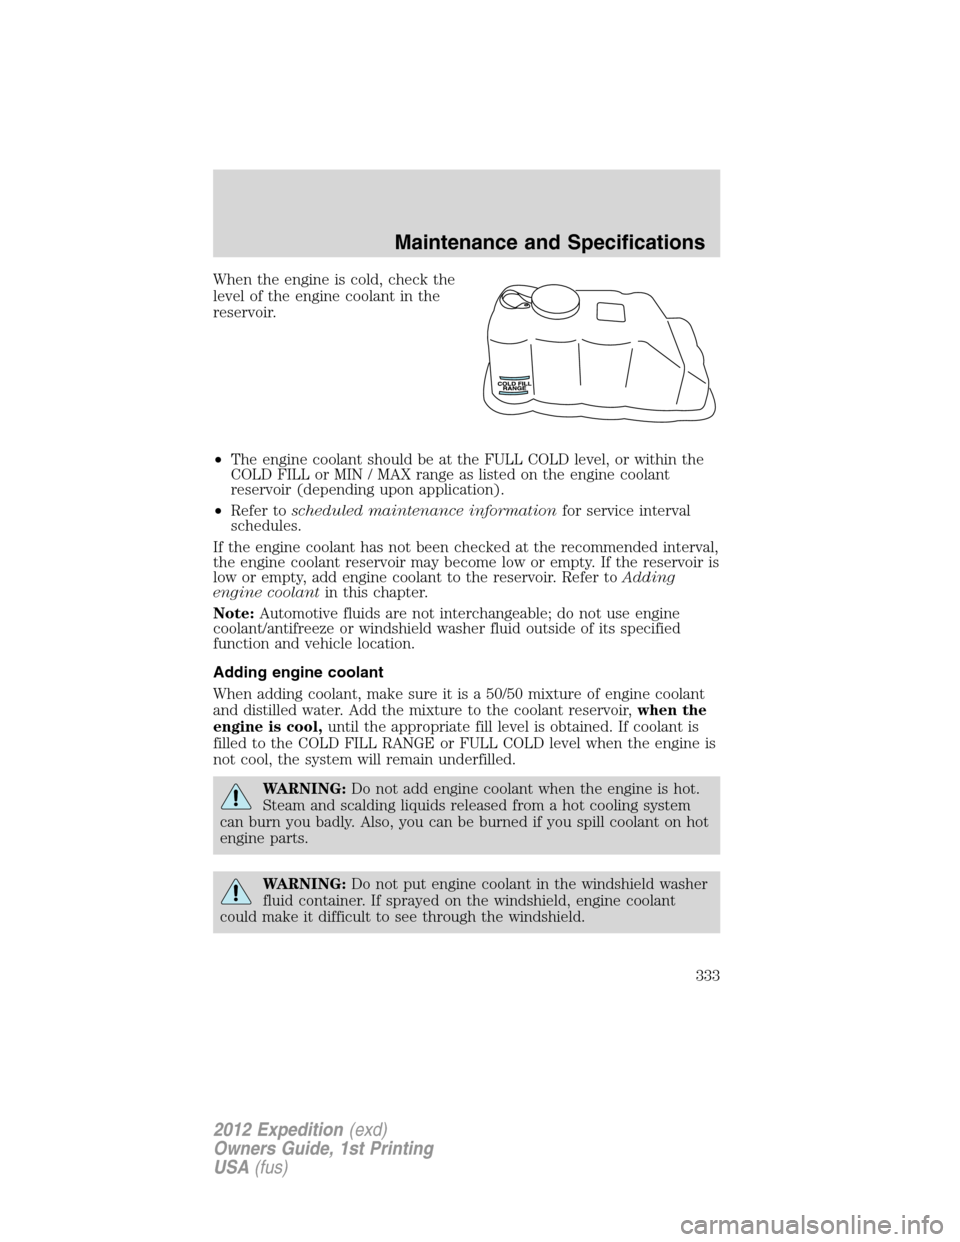 FORD EXPEDITION 2012 3.G Owners Manual When the engine is cold, check the
level of the engine coolant in the
reservoir.
•The engine coolant should be at the FULL COLD level, or within the
COLD FILL or MIN / MAX range as listed on the eng